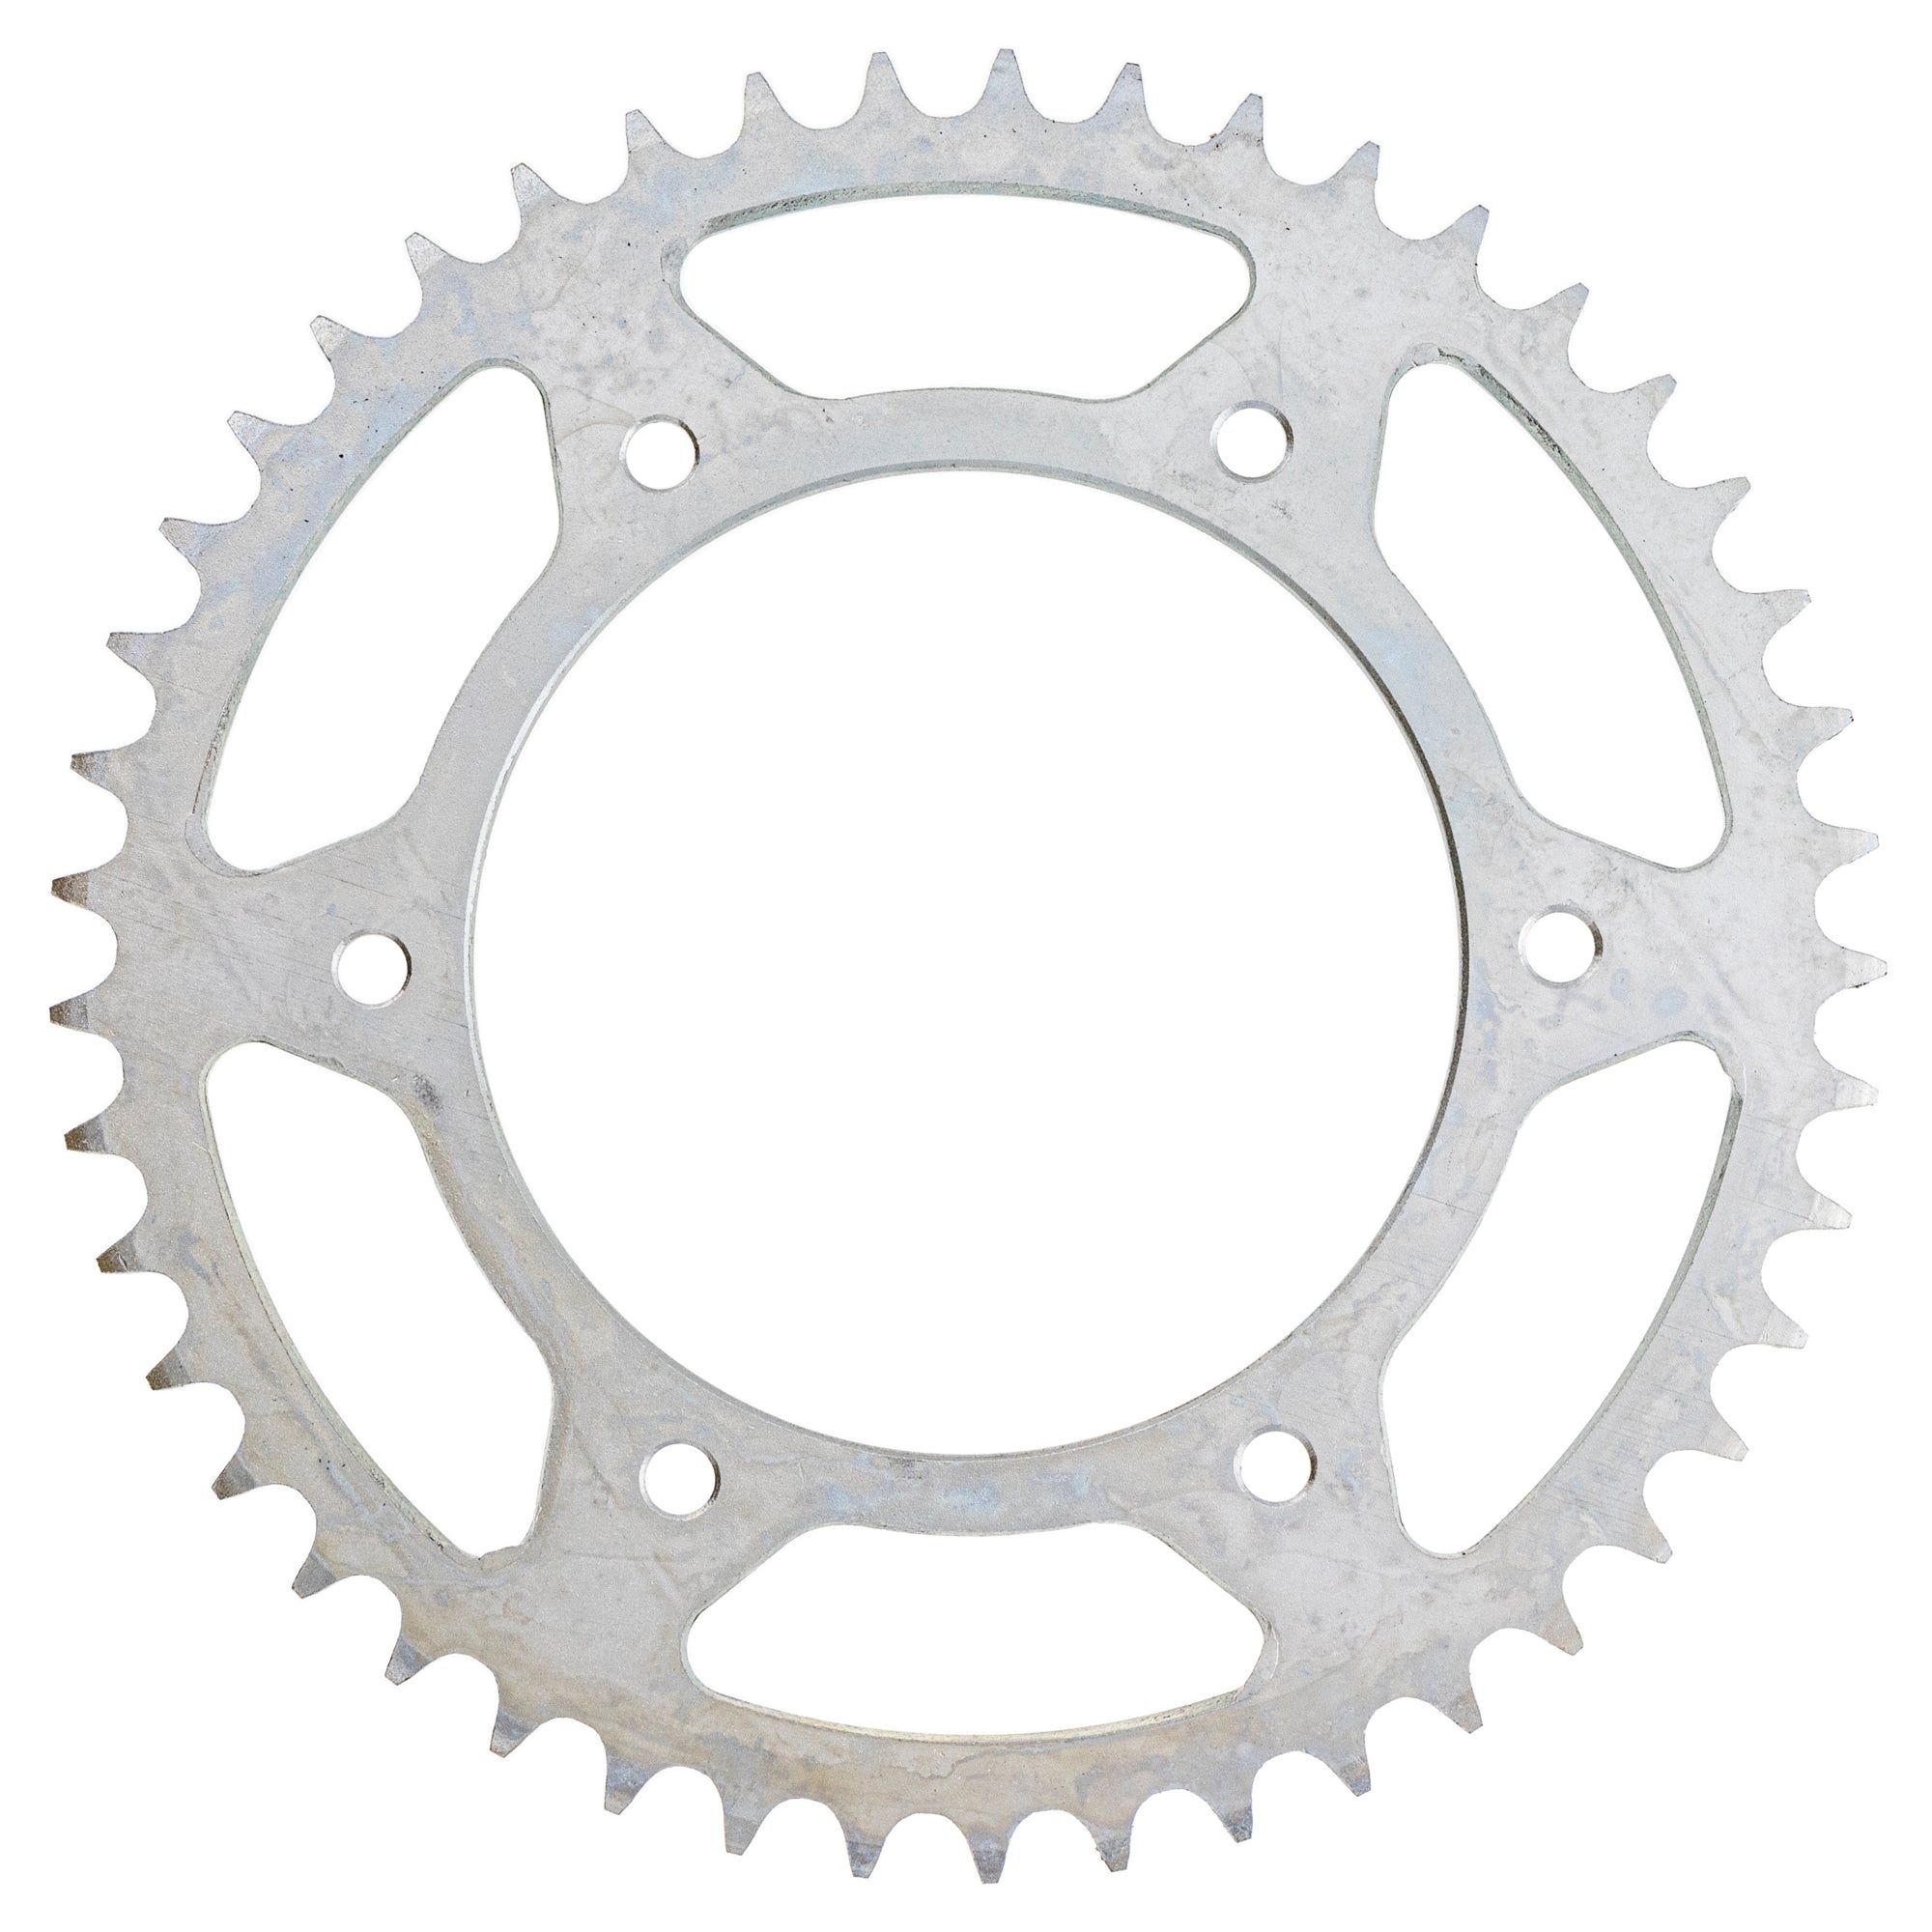 520 Pitch Front 15T Rear 45T Drive Sprocket Kit for KTM 250 125 300